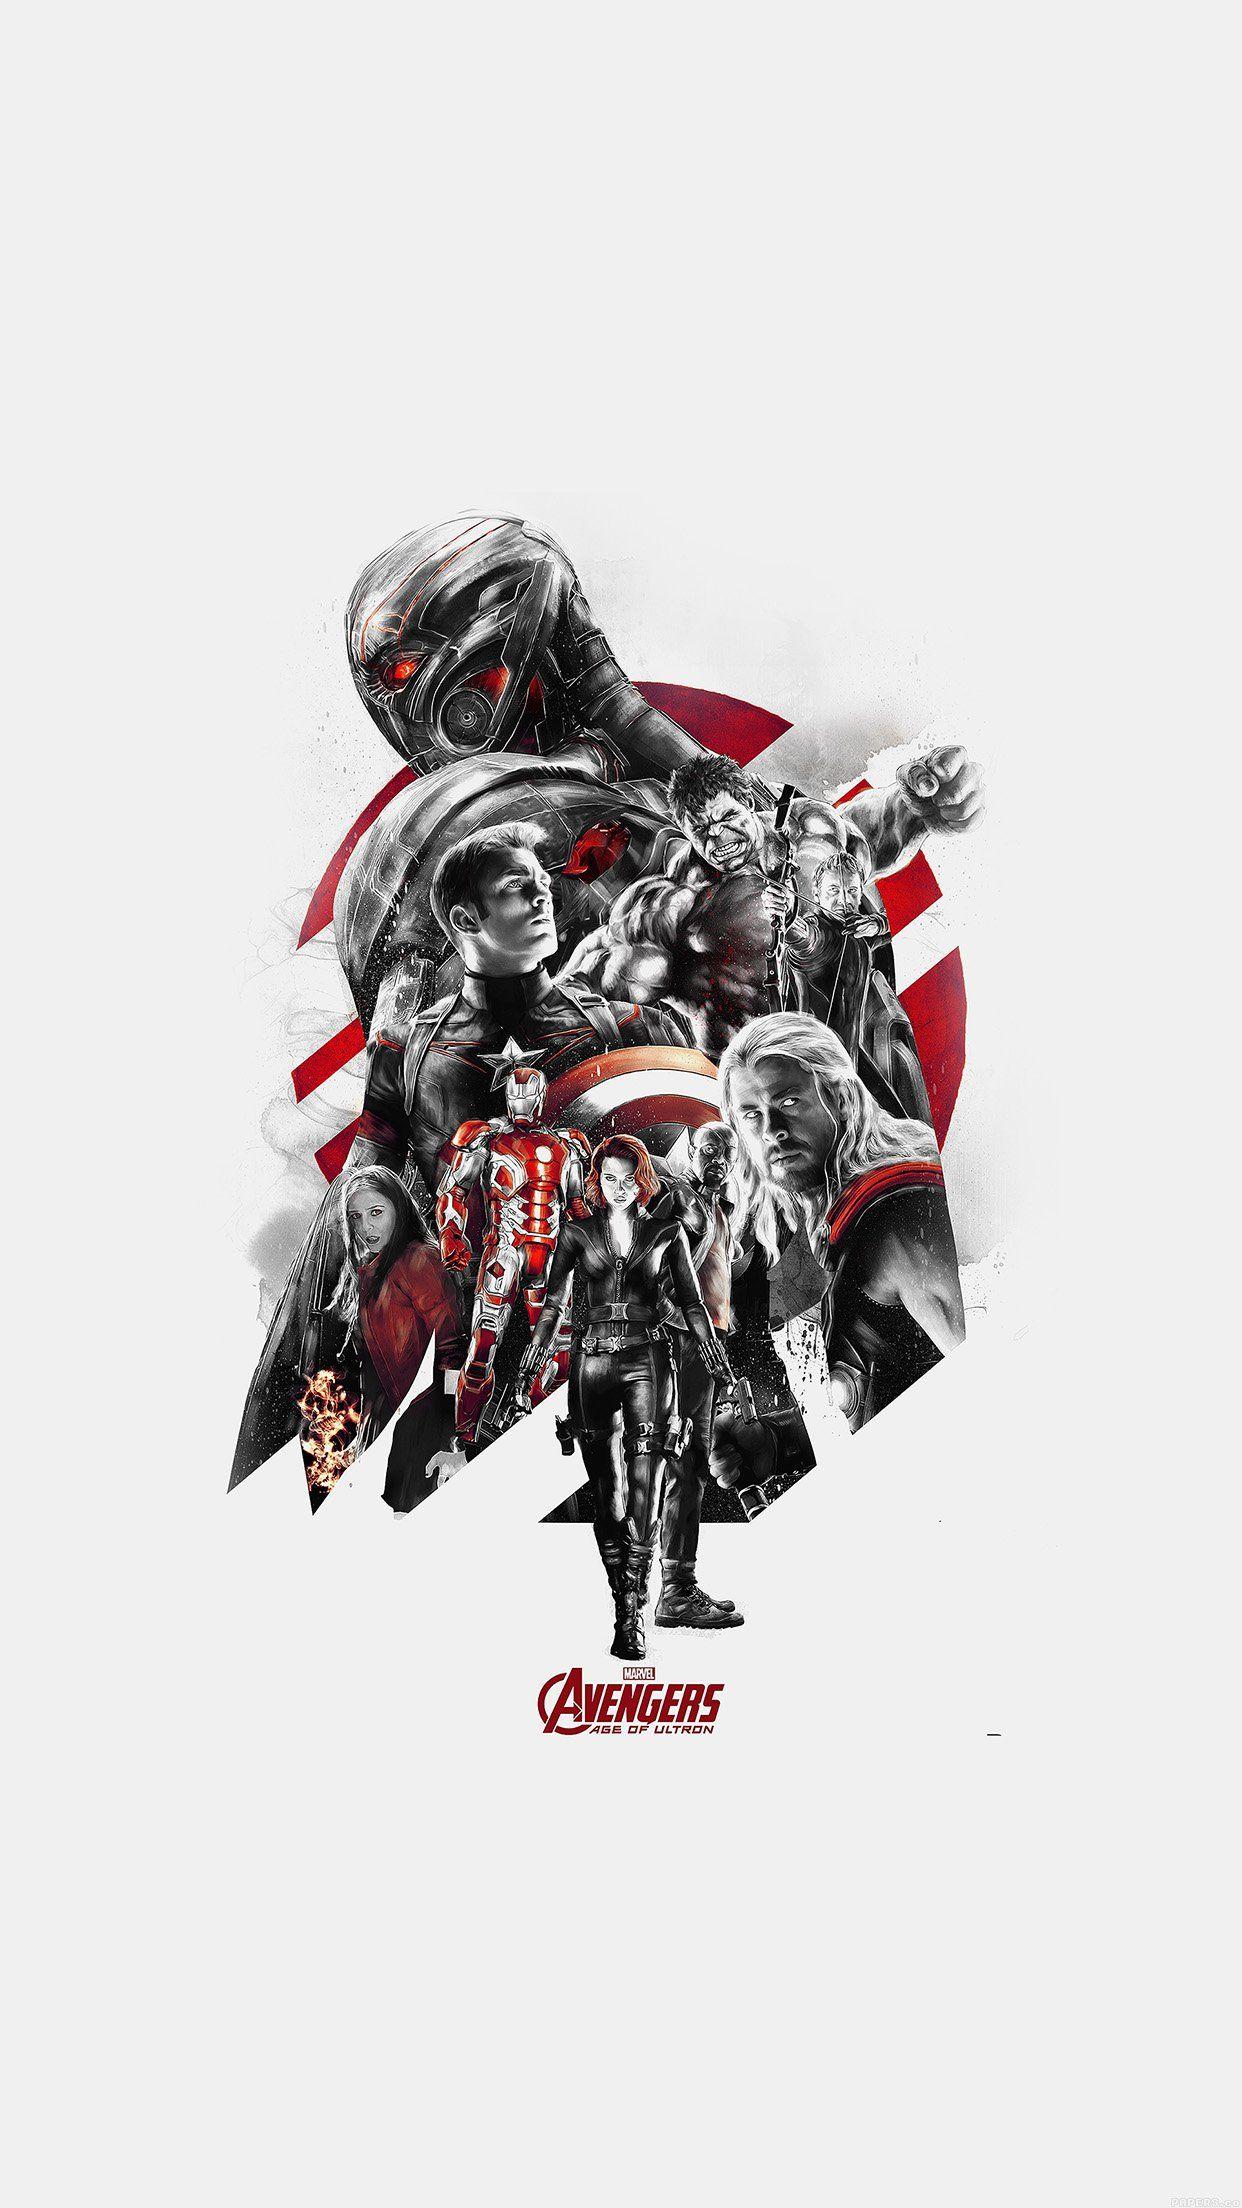 Iphone wallpaper for avengers age of ultron - Avengers